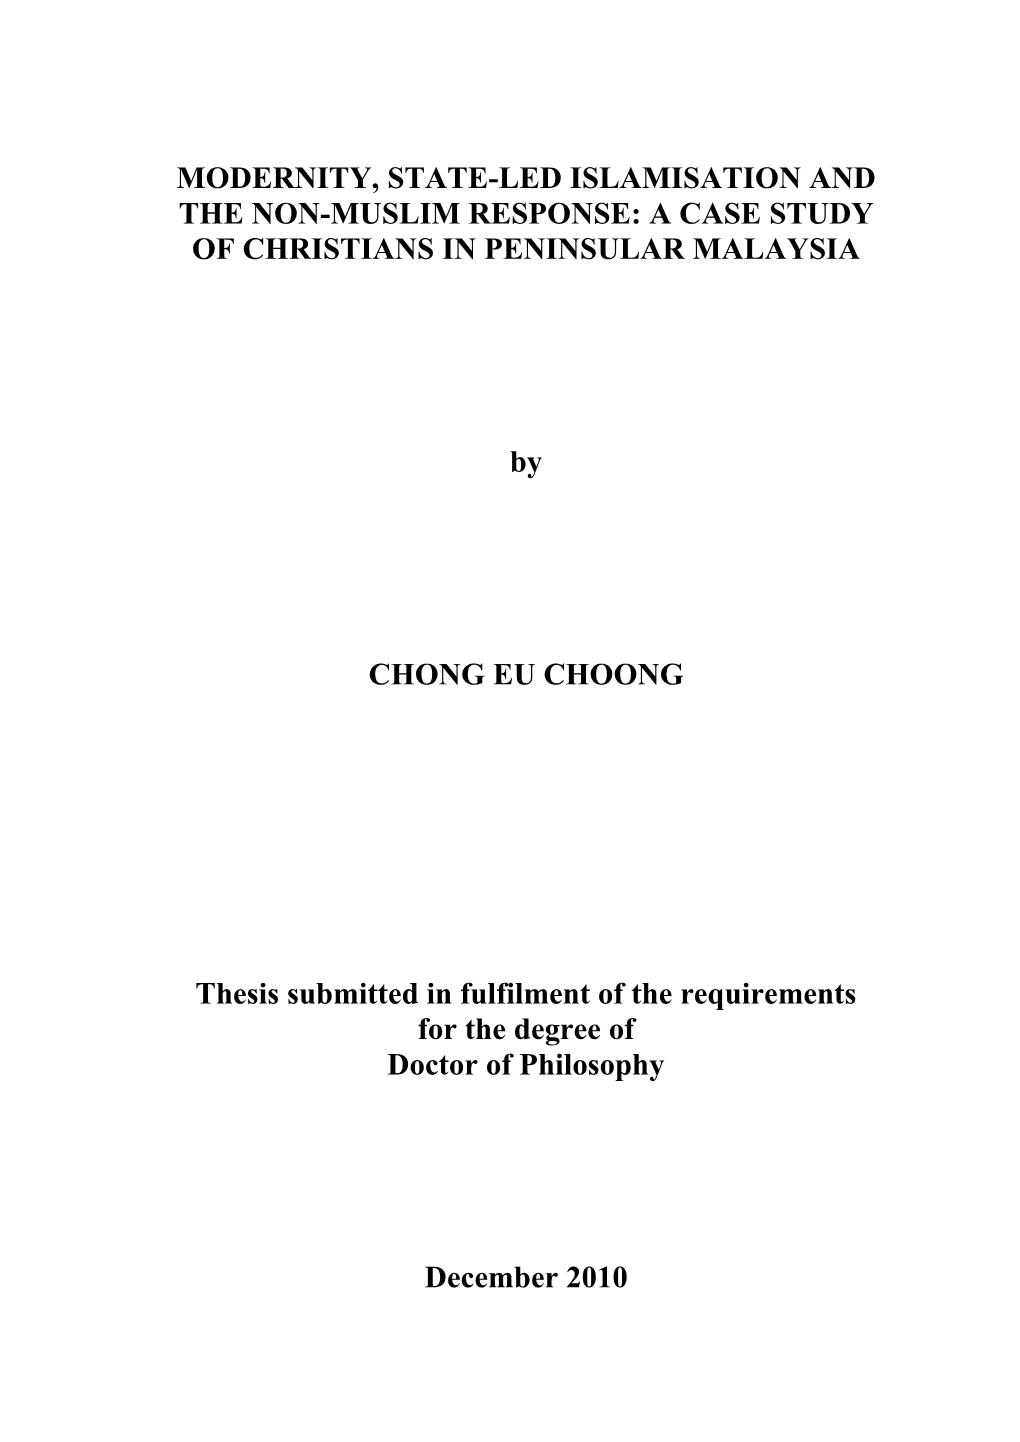 Modernity, State-Led Islamisation and the Non-Muslim Response: a Case Study of Christians in Peninsular Malaysia